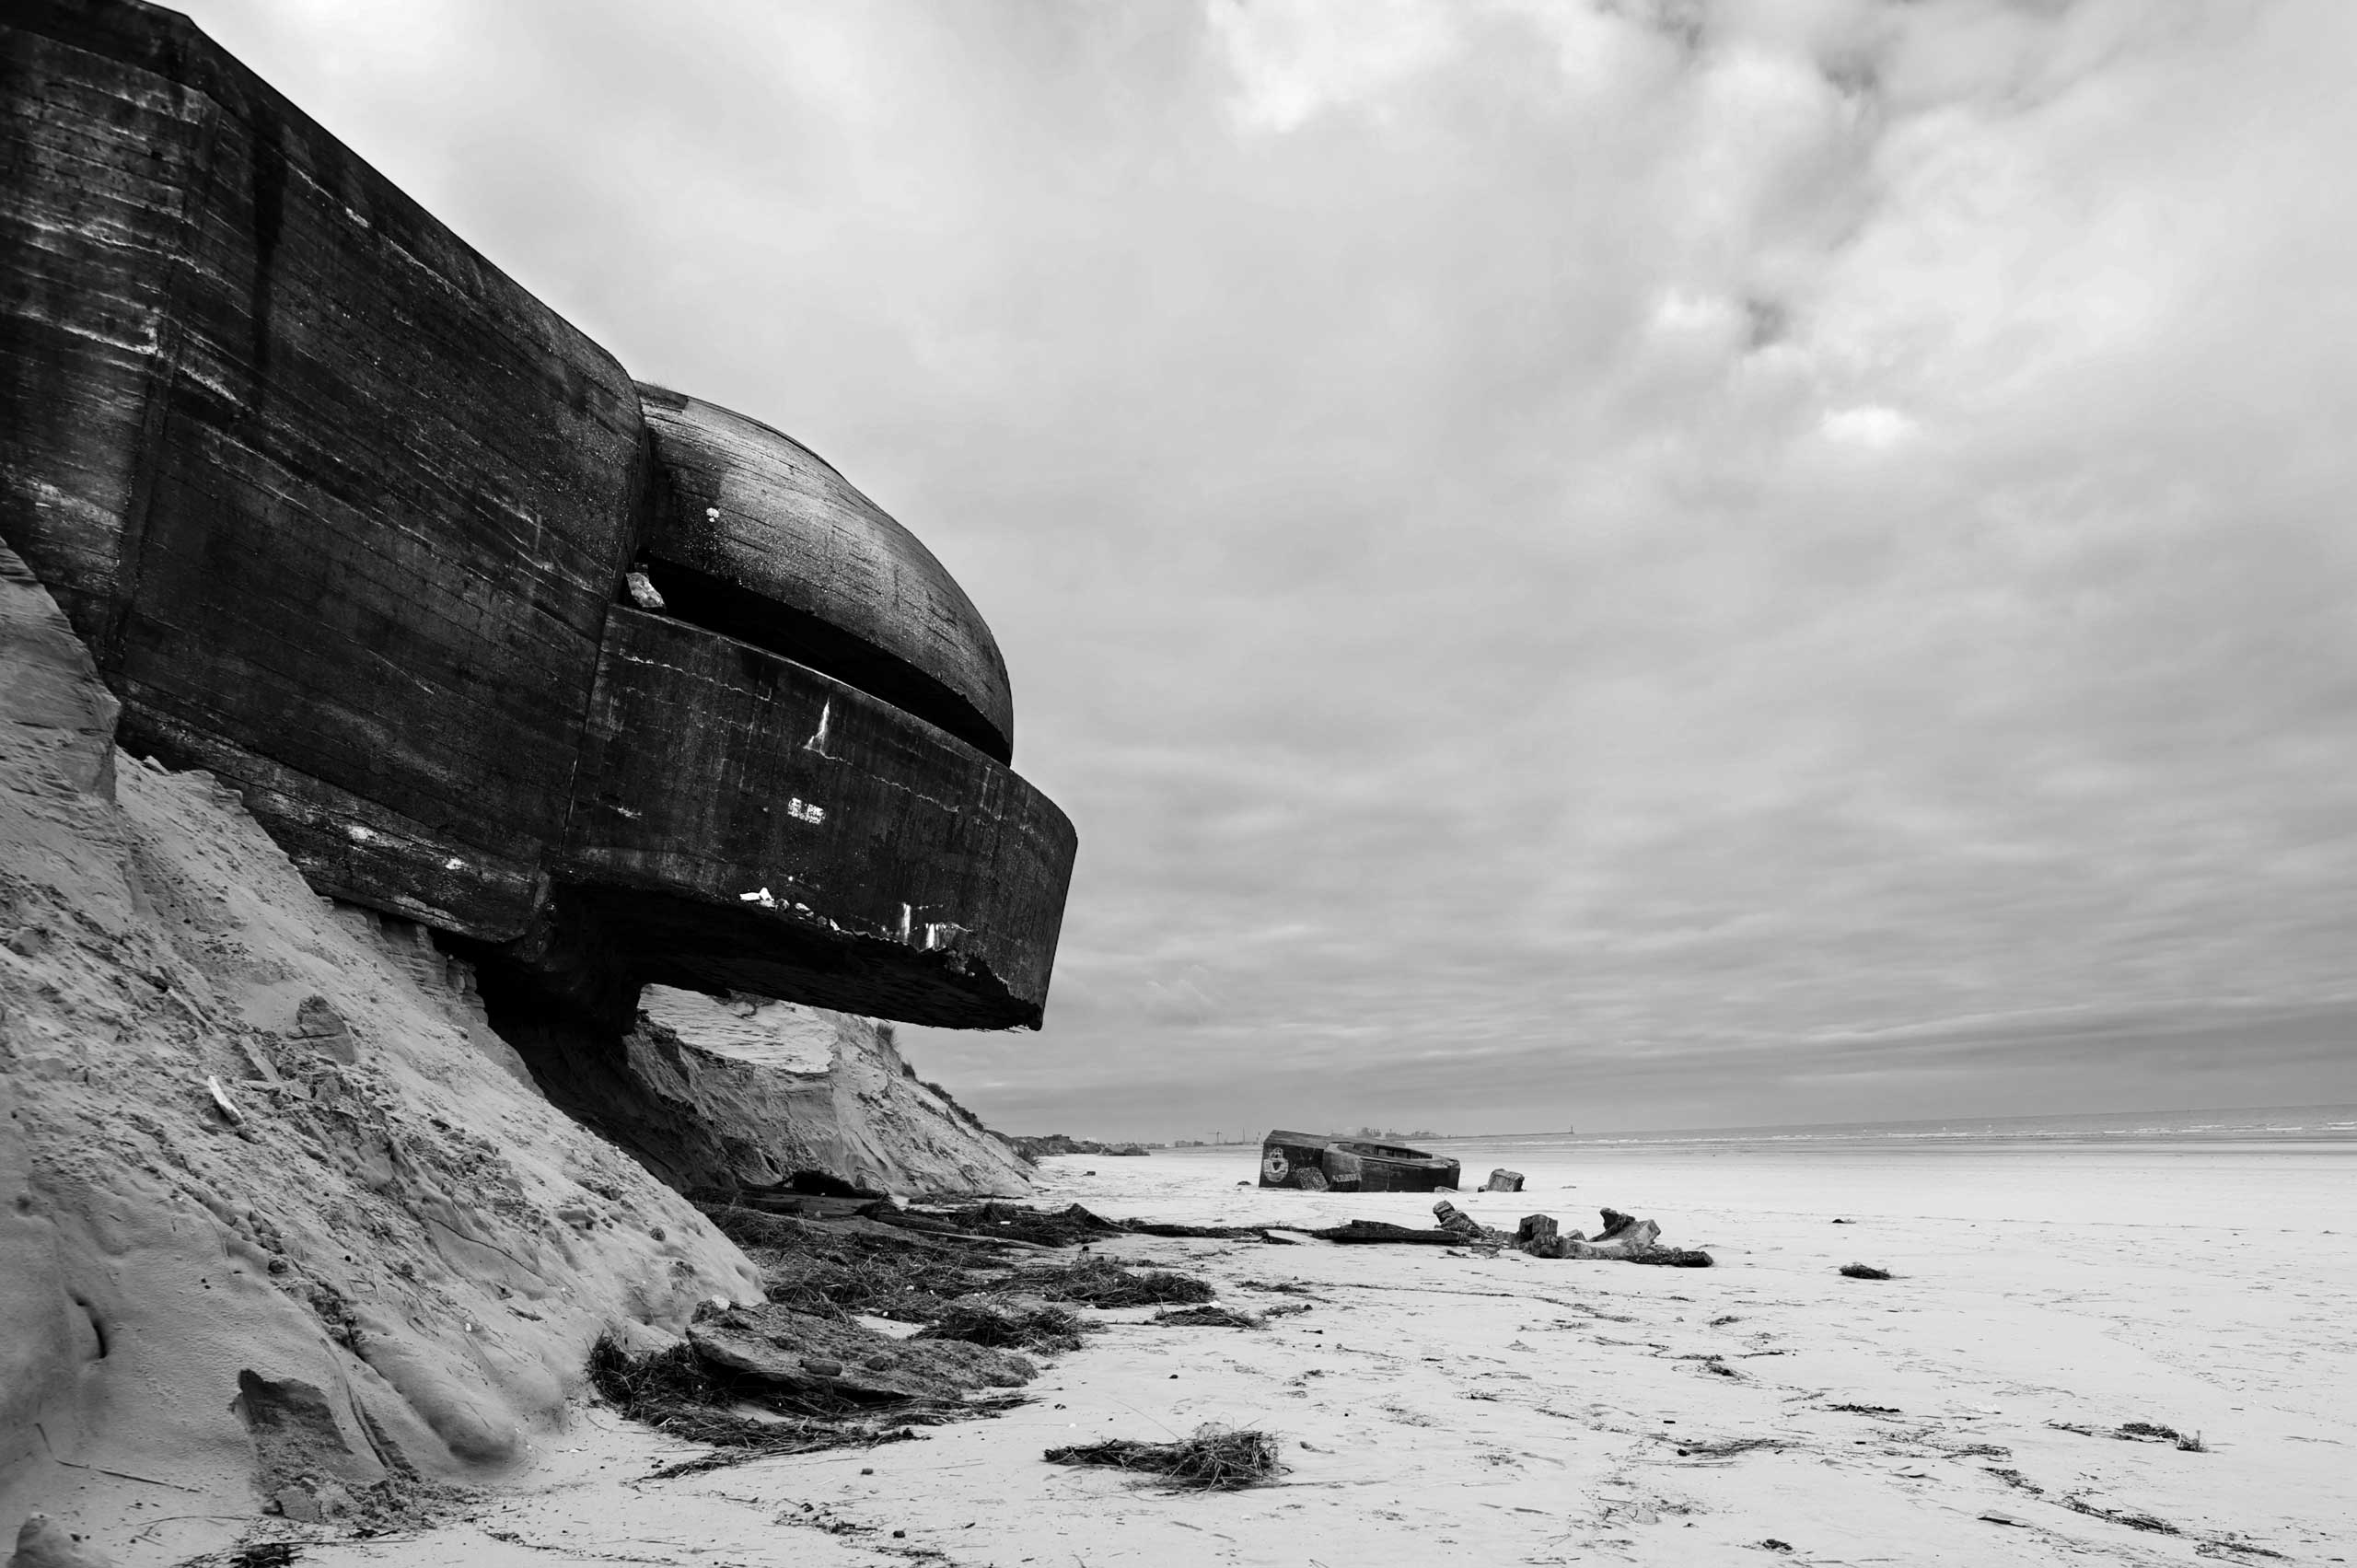 A concrete bunker used by the German Army in WWII sits precariously on top of an eroding sea front in France along the route of the Atlantic Wall (Atlantikwall in German).